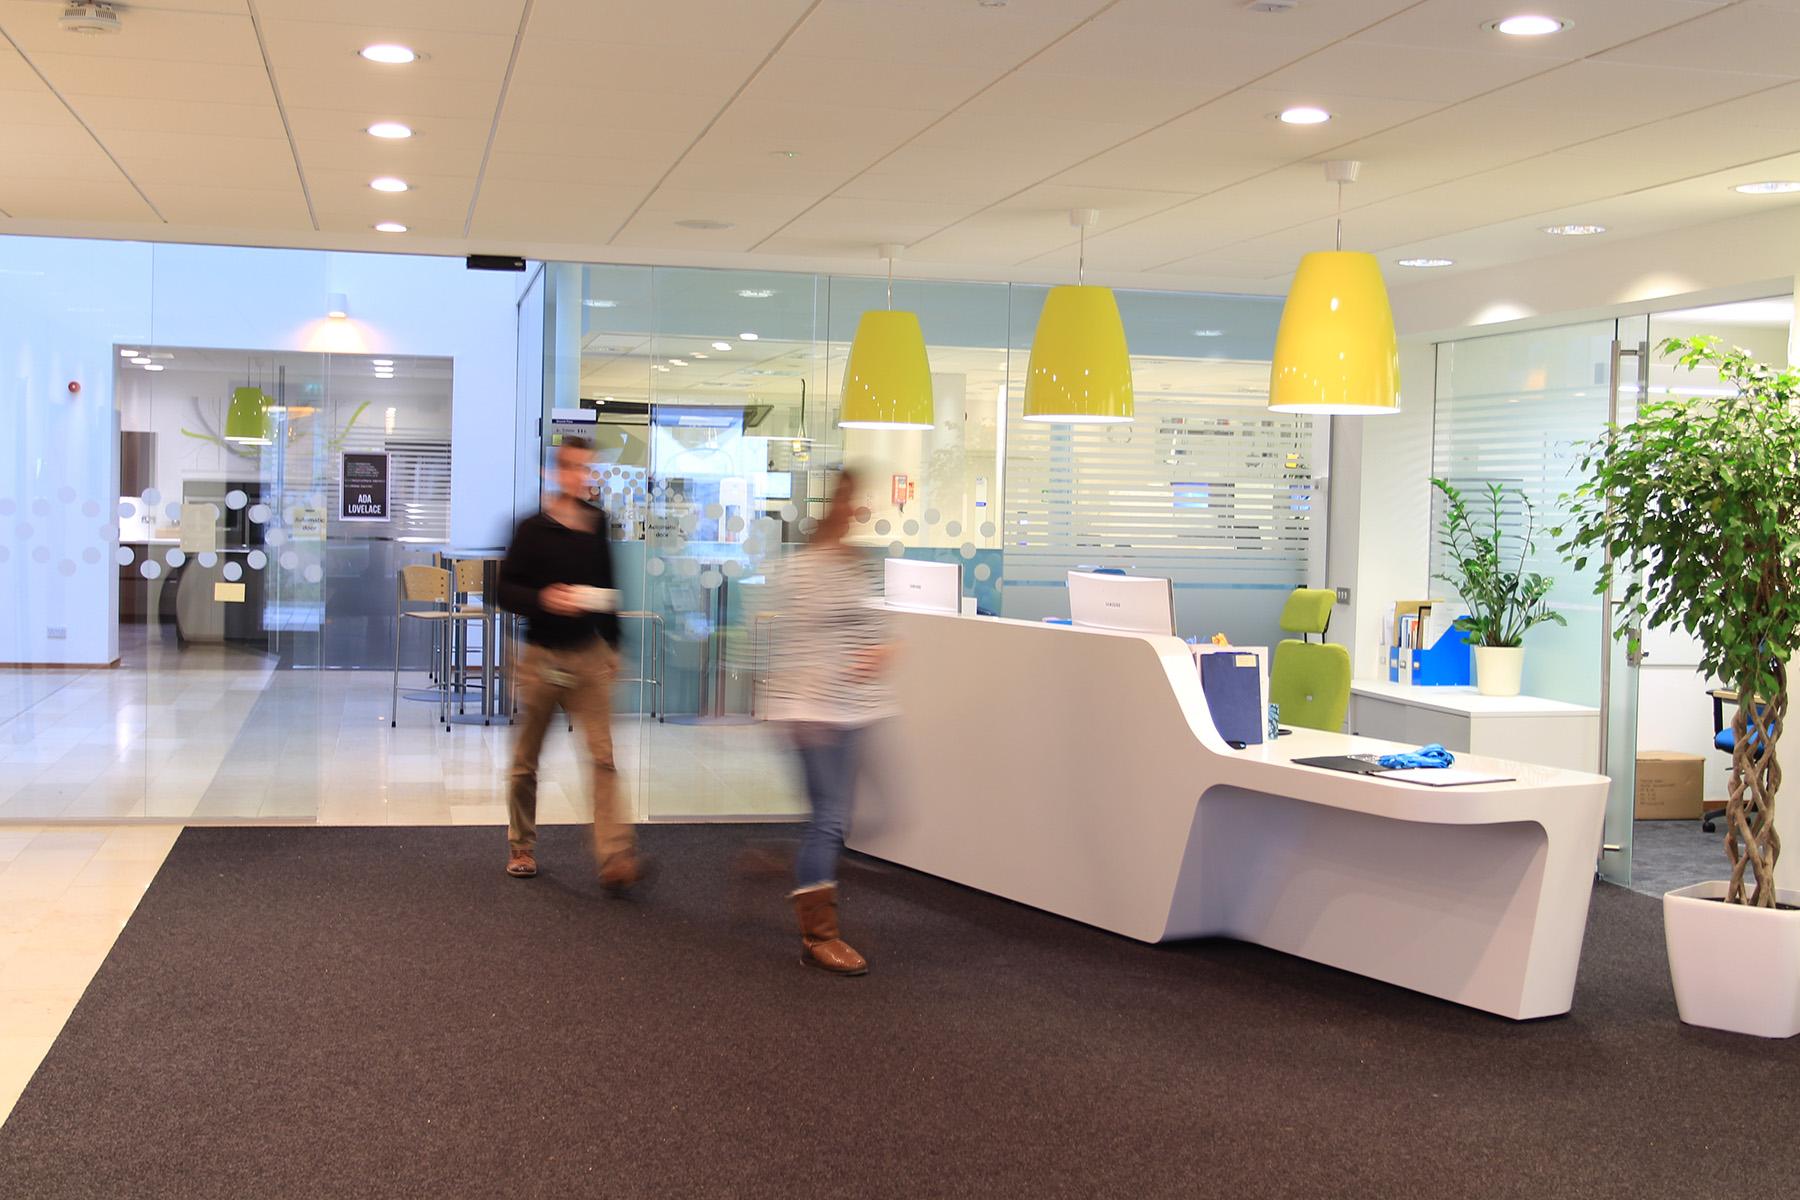 Reception area of the Earlham Institute with blurred people walking past